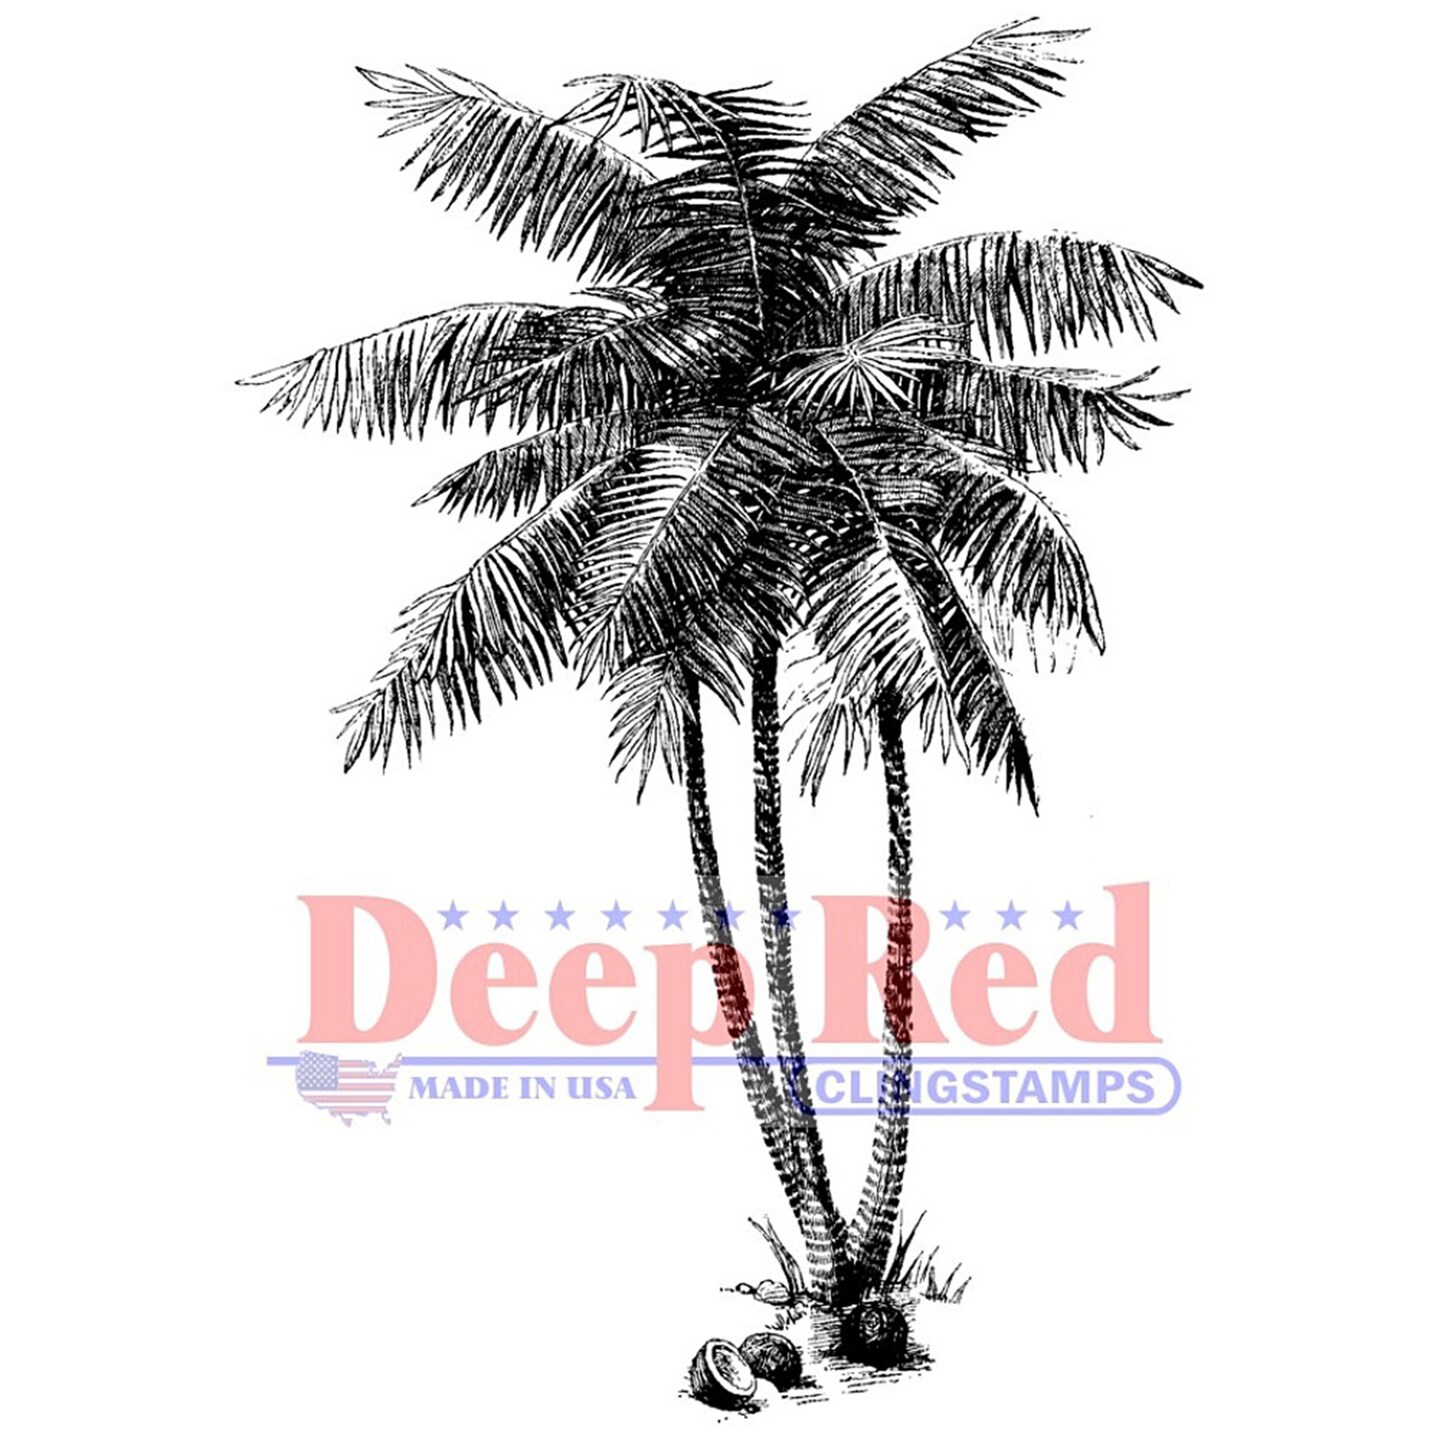 Deep Red Stamps Coconut Palms Rubber Cling Stamp 2.1 x 3.1 inches